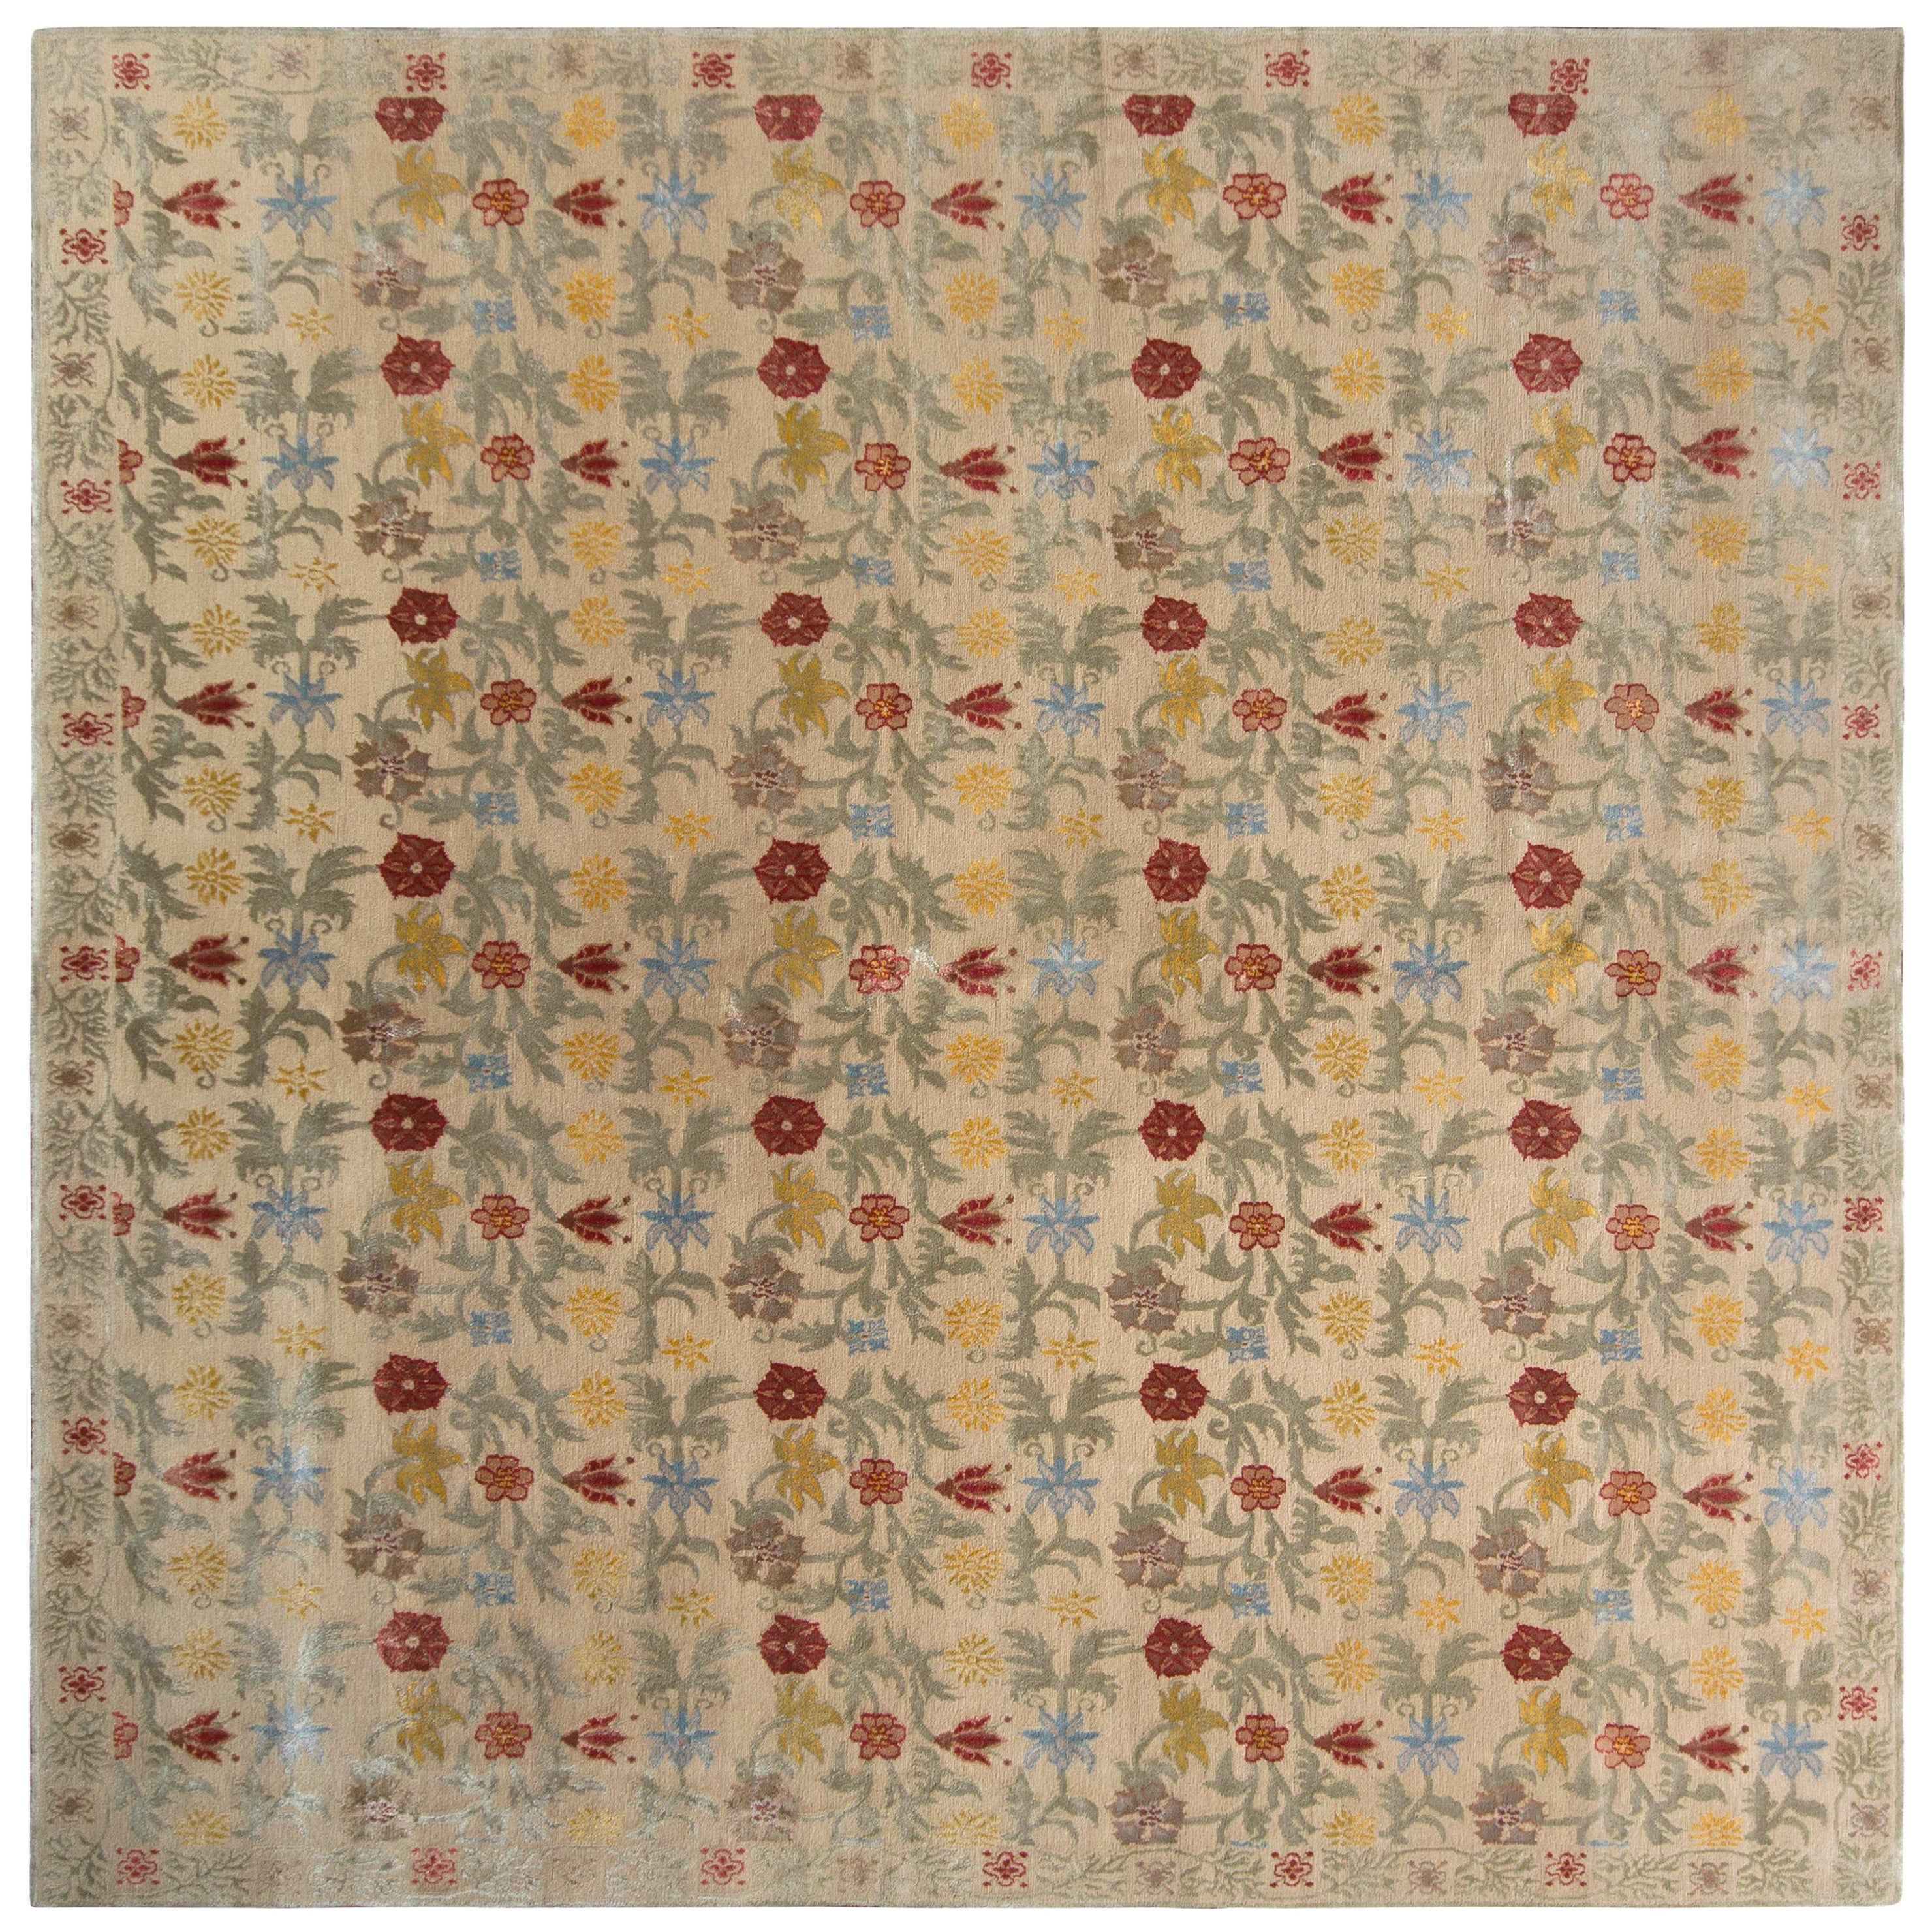 Rug & Kilim's Transitional European Style Rug in Gold und Grün All-Over Floral